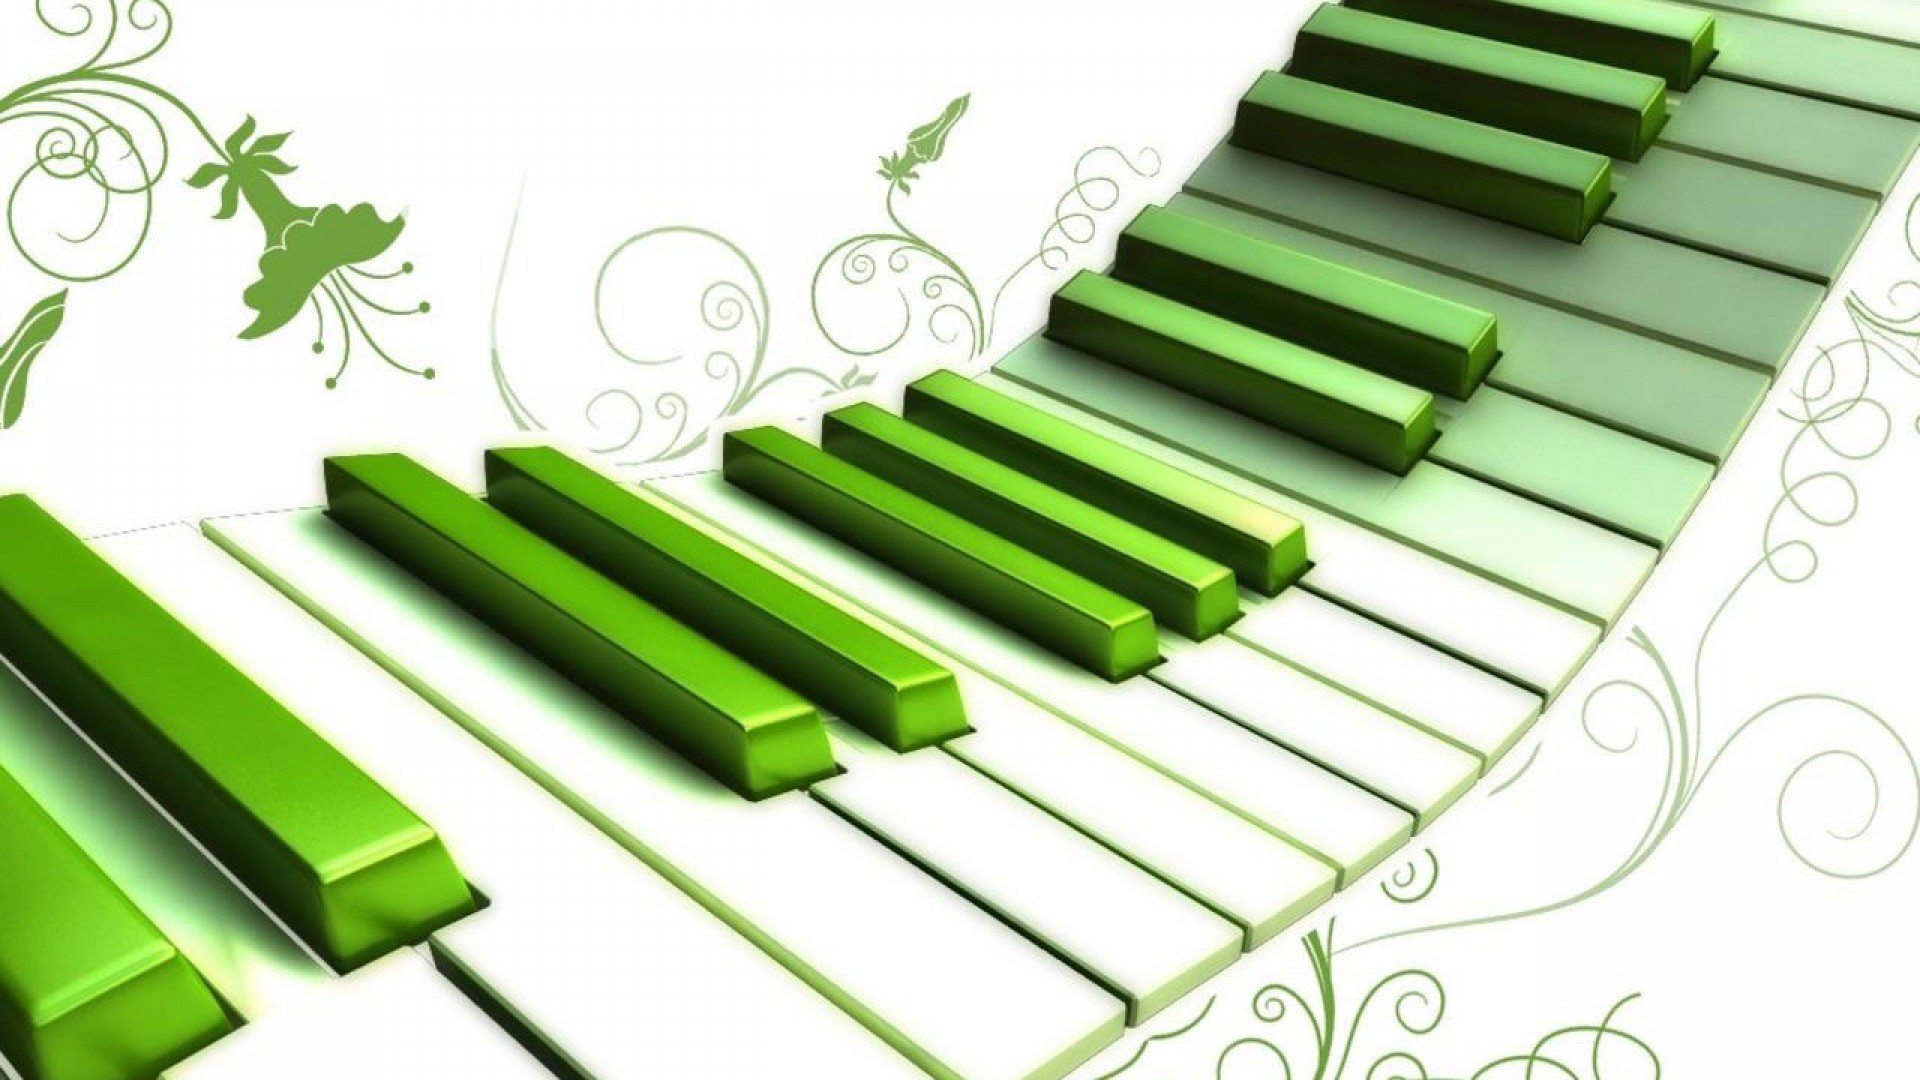 1920x1080, Free Images Hd Piano Wallpapers Desktop - Music Piano Wallpaper Hd - HD Wallpaper 